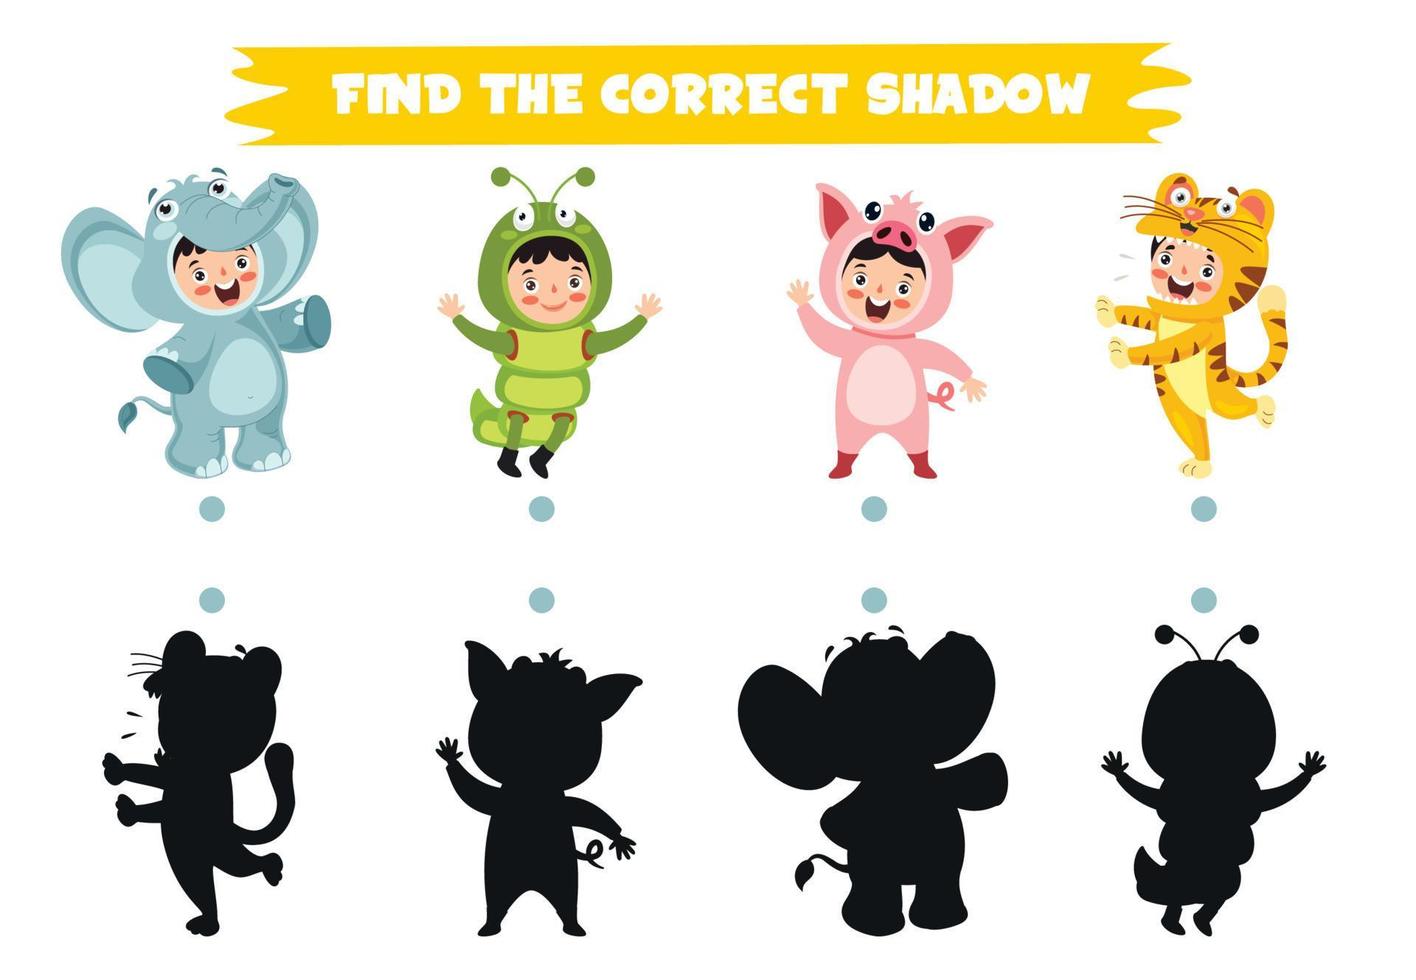 Find The Correct Shadow Activity vector